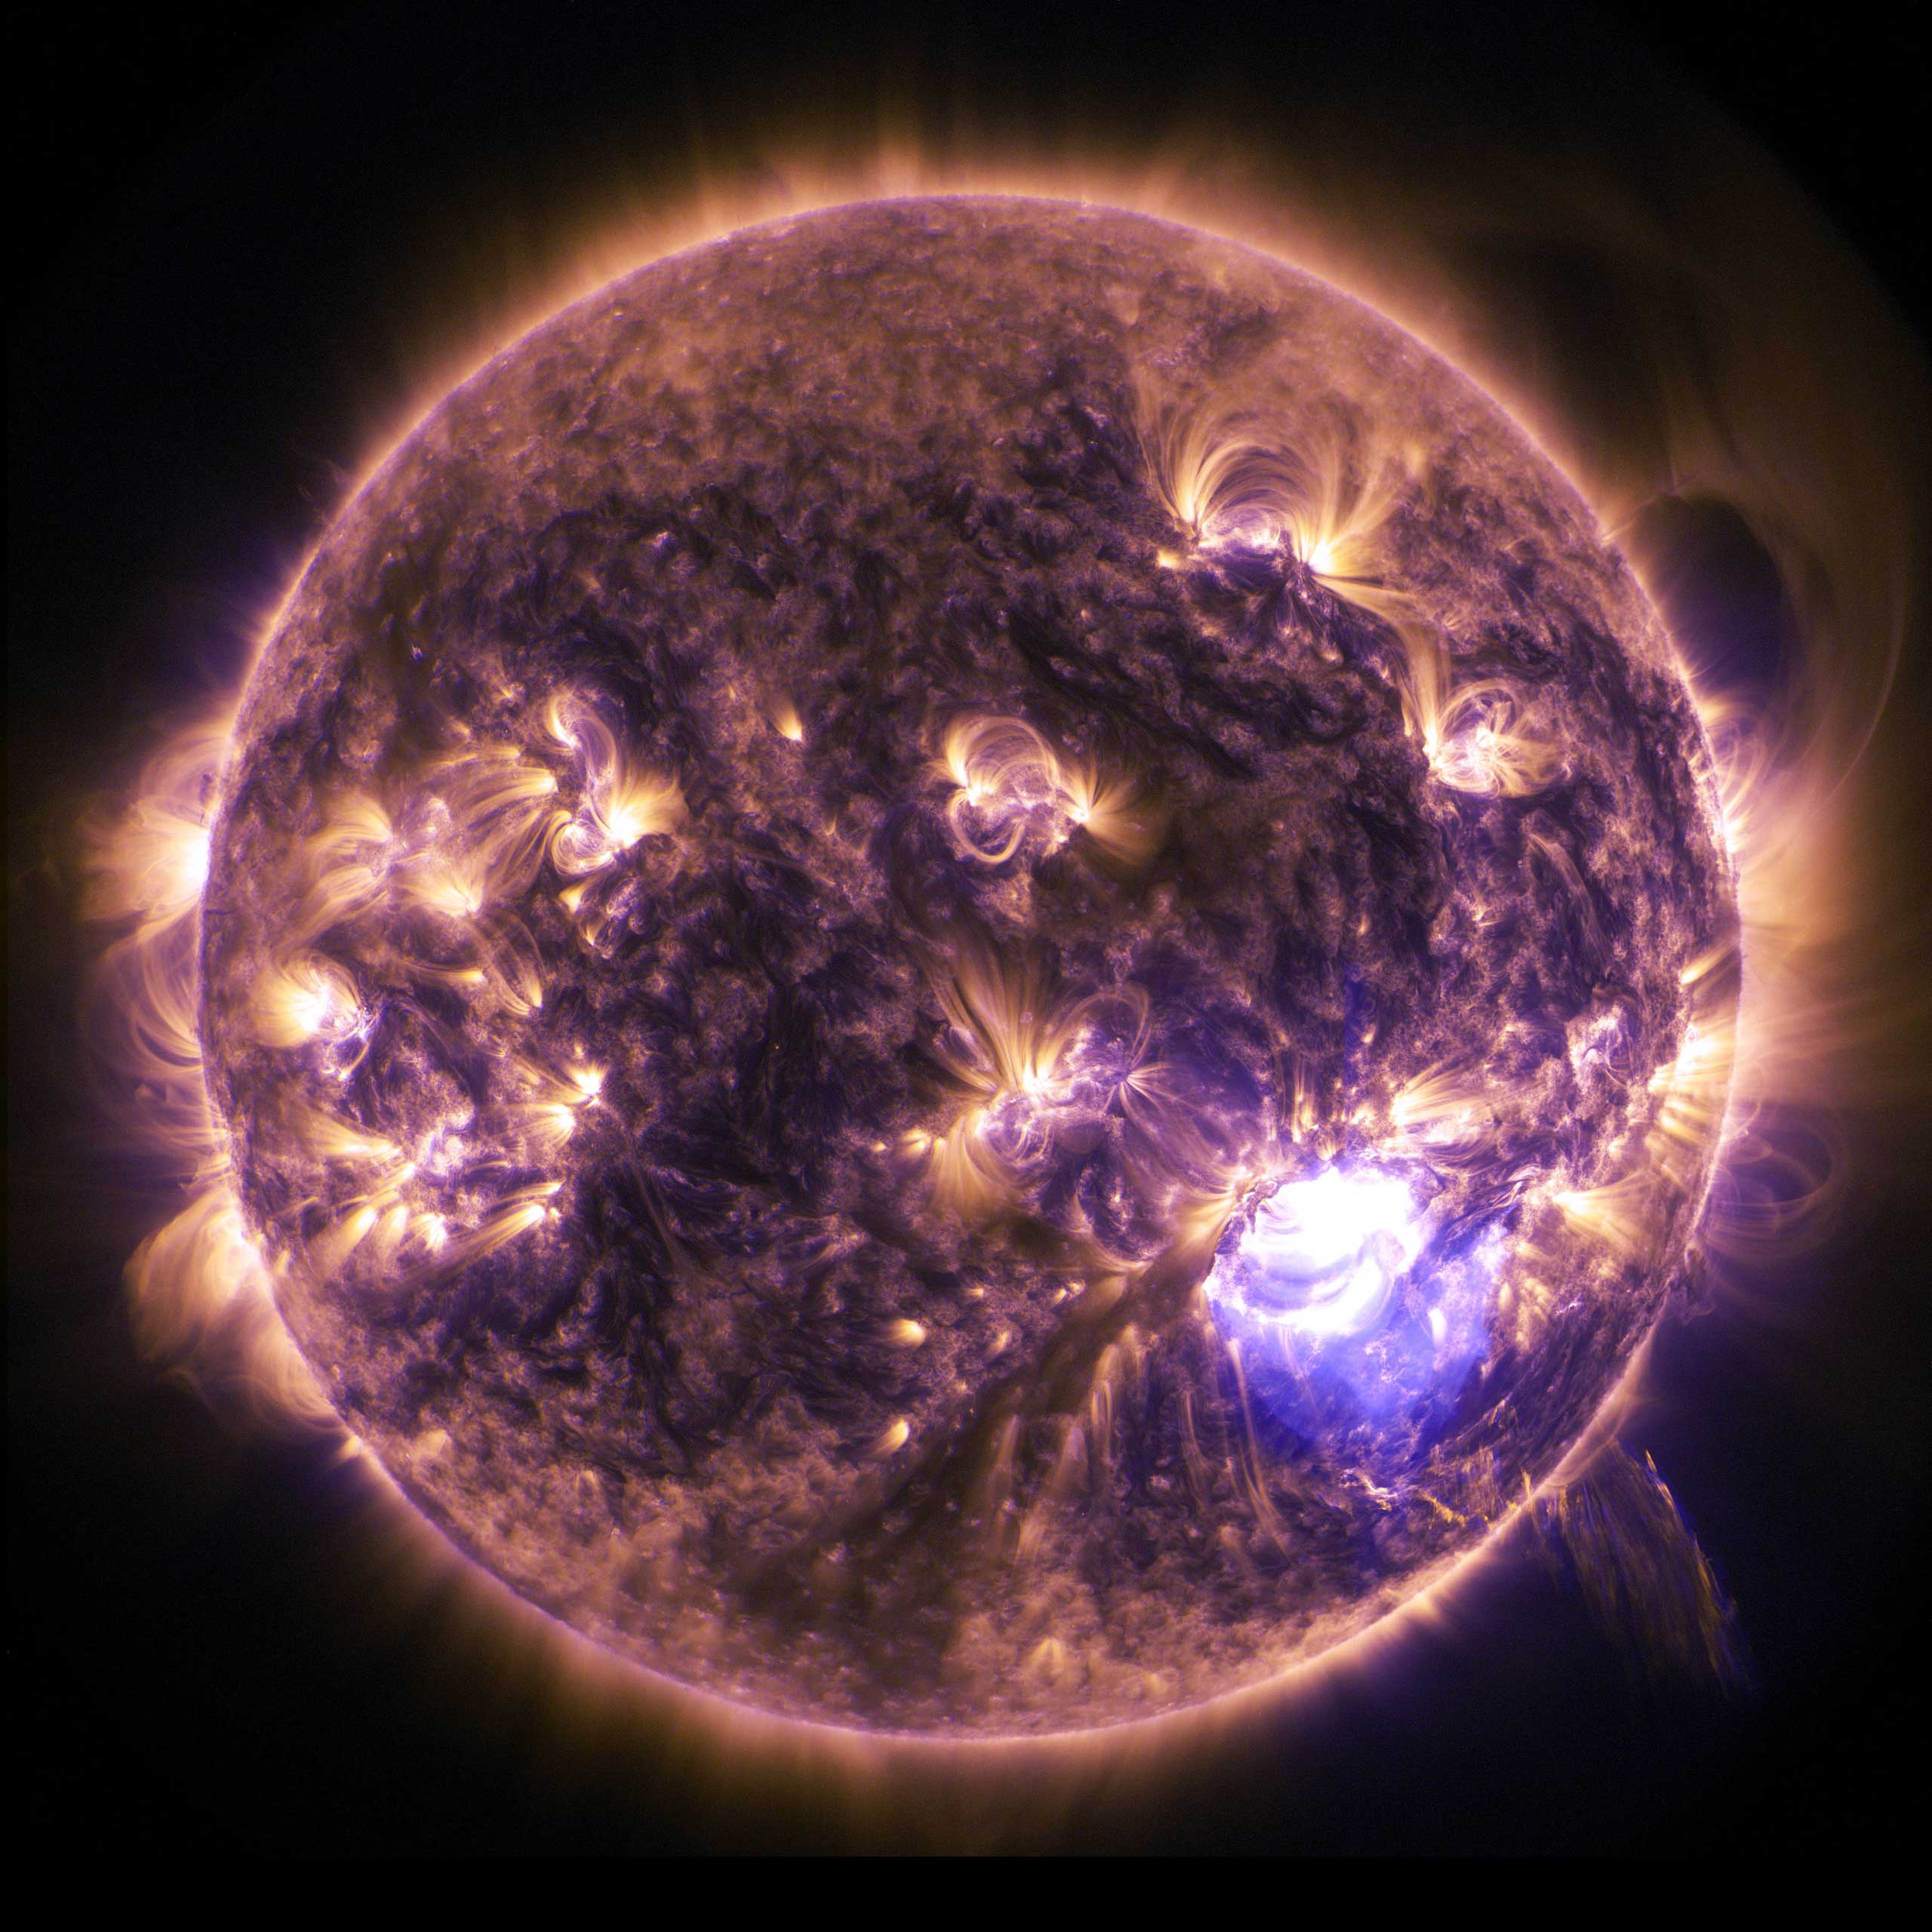 The sun emits a significant solar flare on Dec. 19, 2014 as seen from NASA’s Solar Dynamics Observatory,